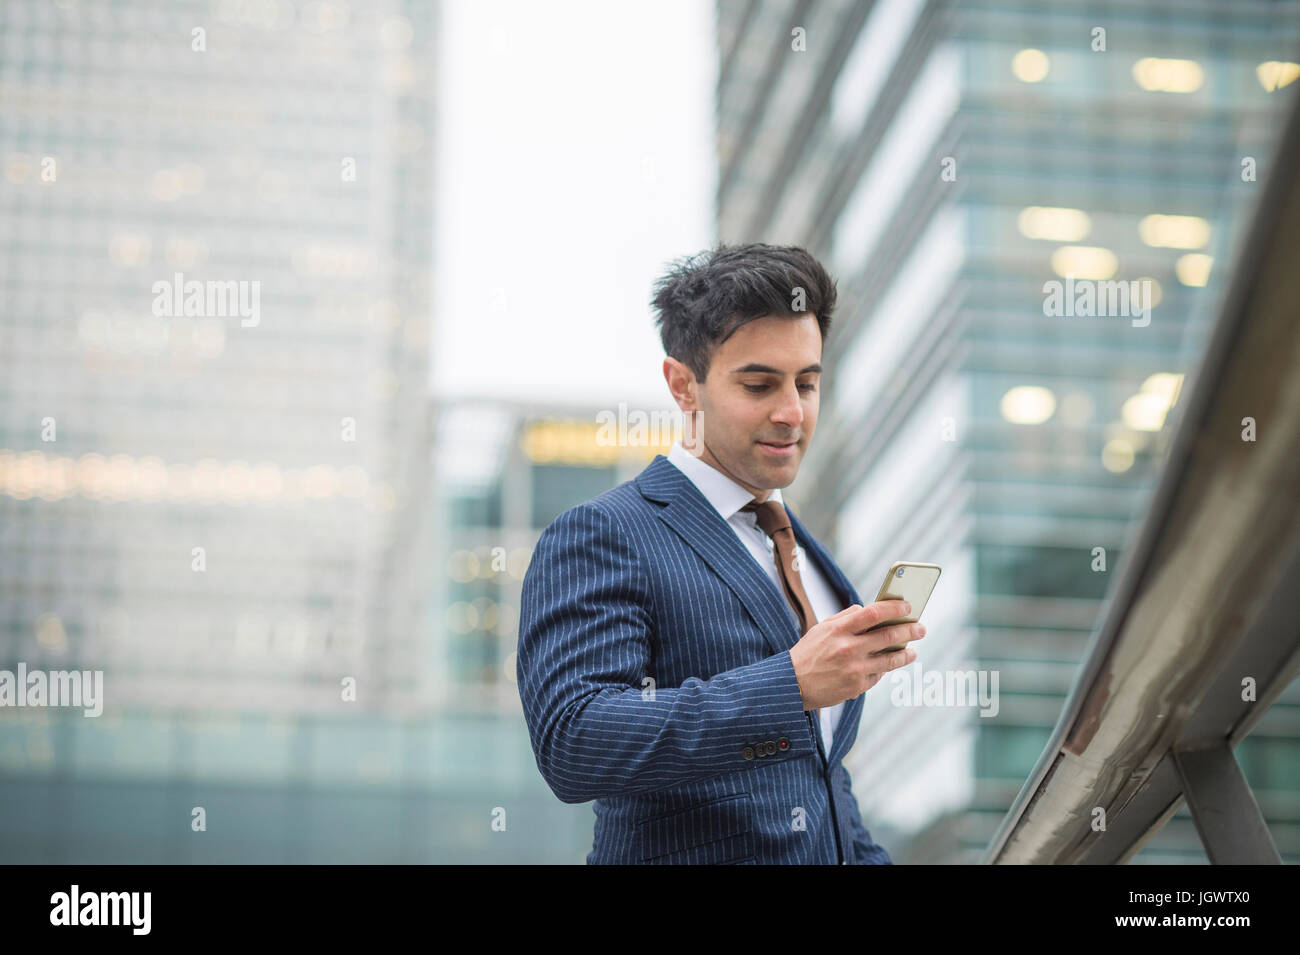 Businessman using mobile phone, Canary Wharf, London, UK Banque D'Images